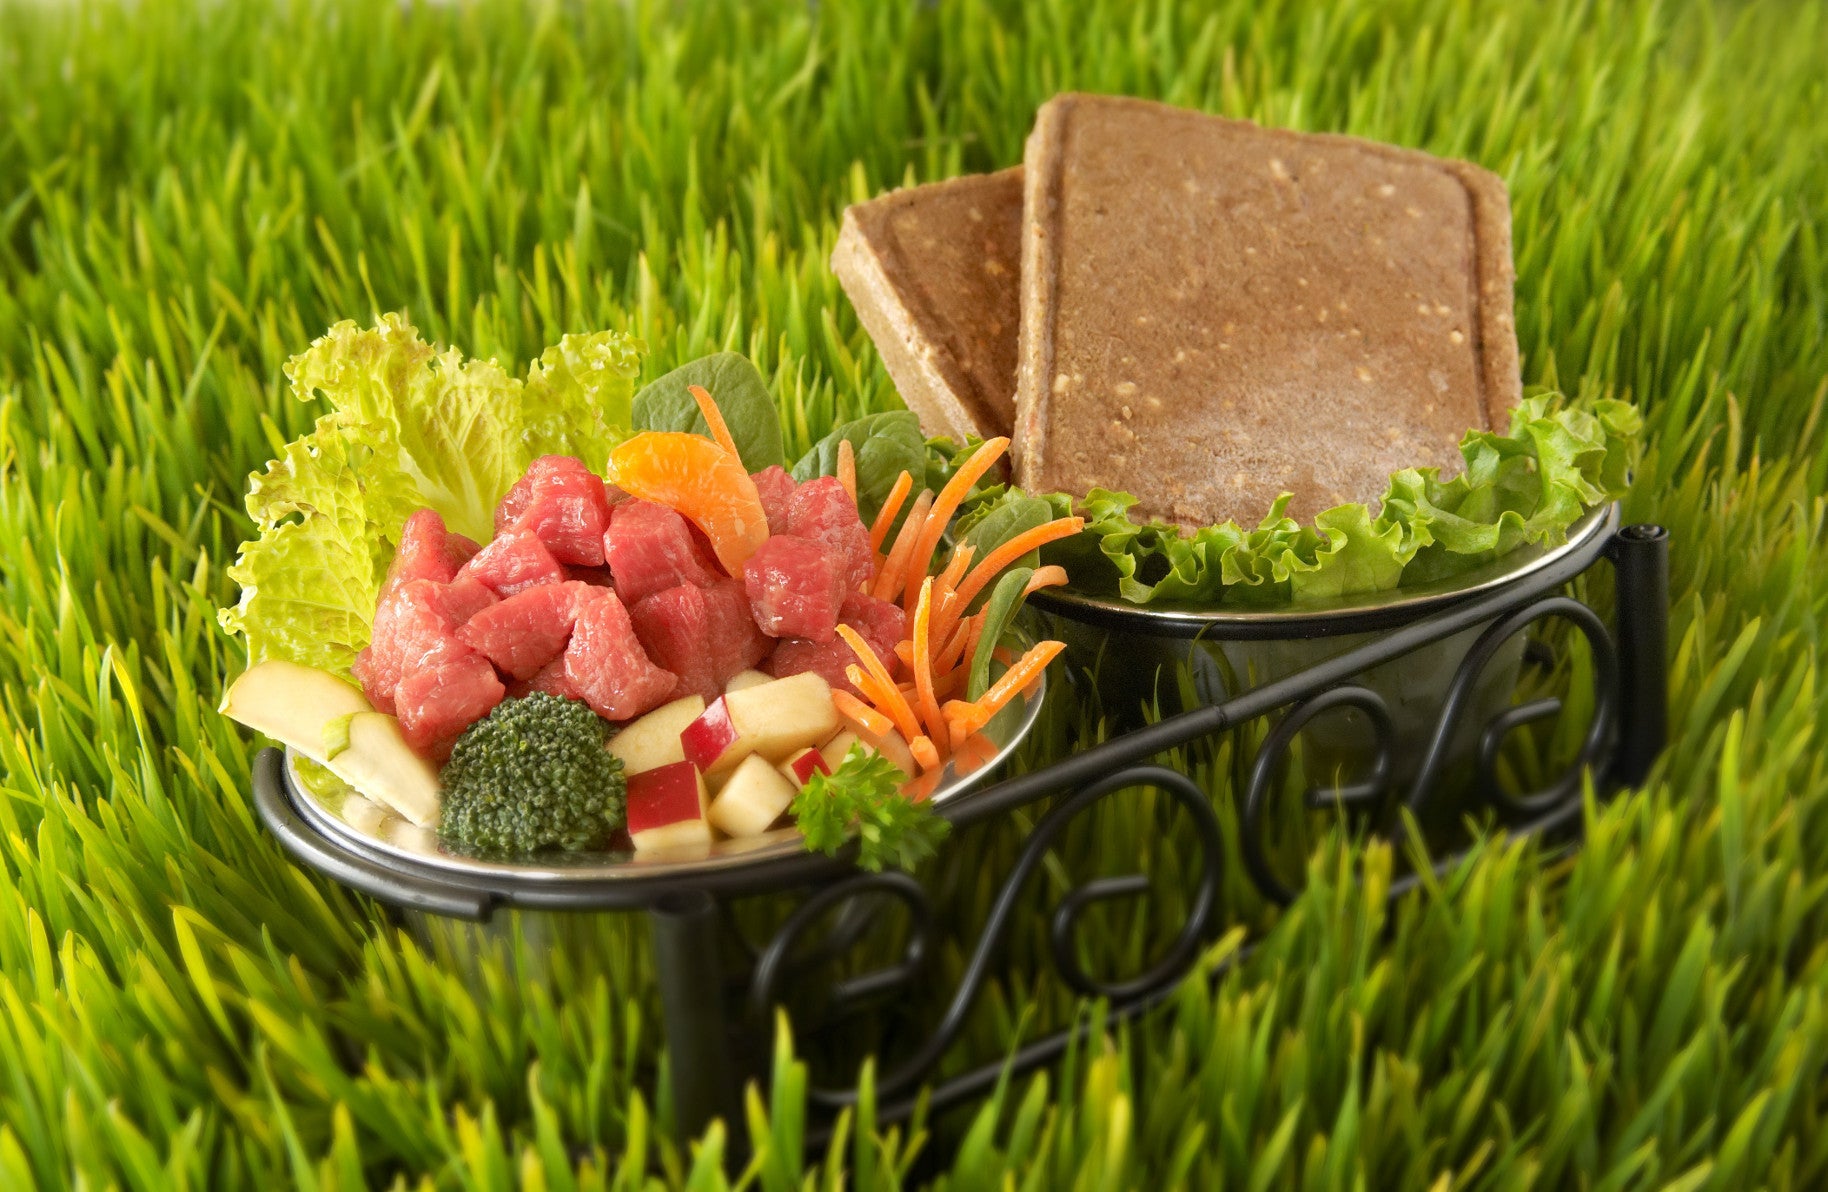 Dog bowls filled with fresh ingredients set in grass